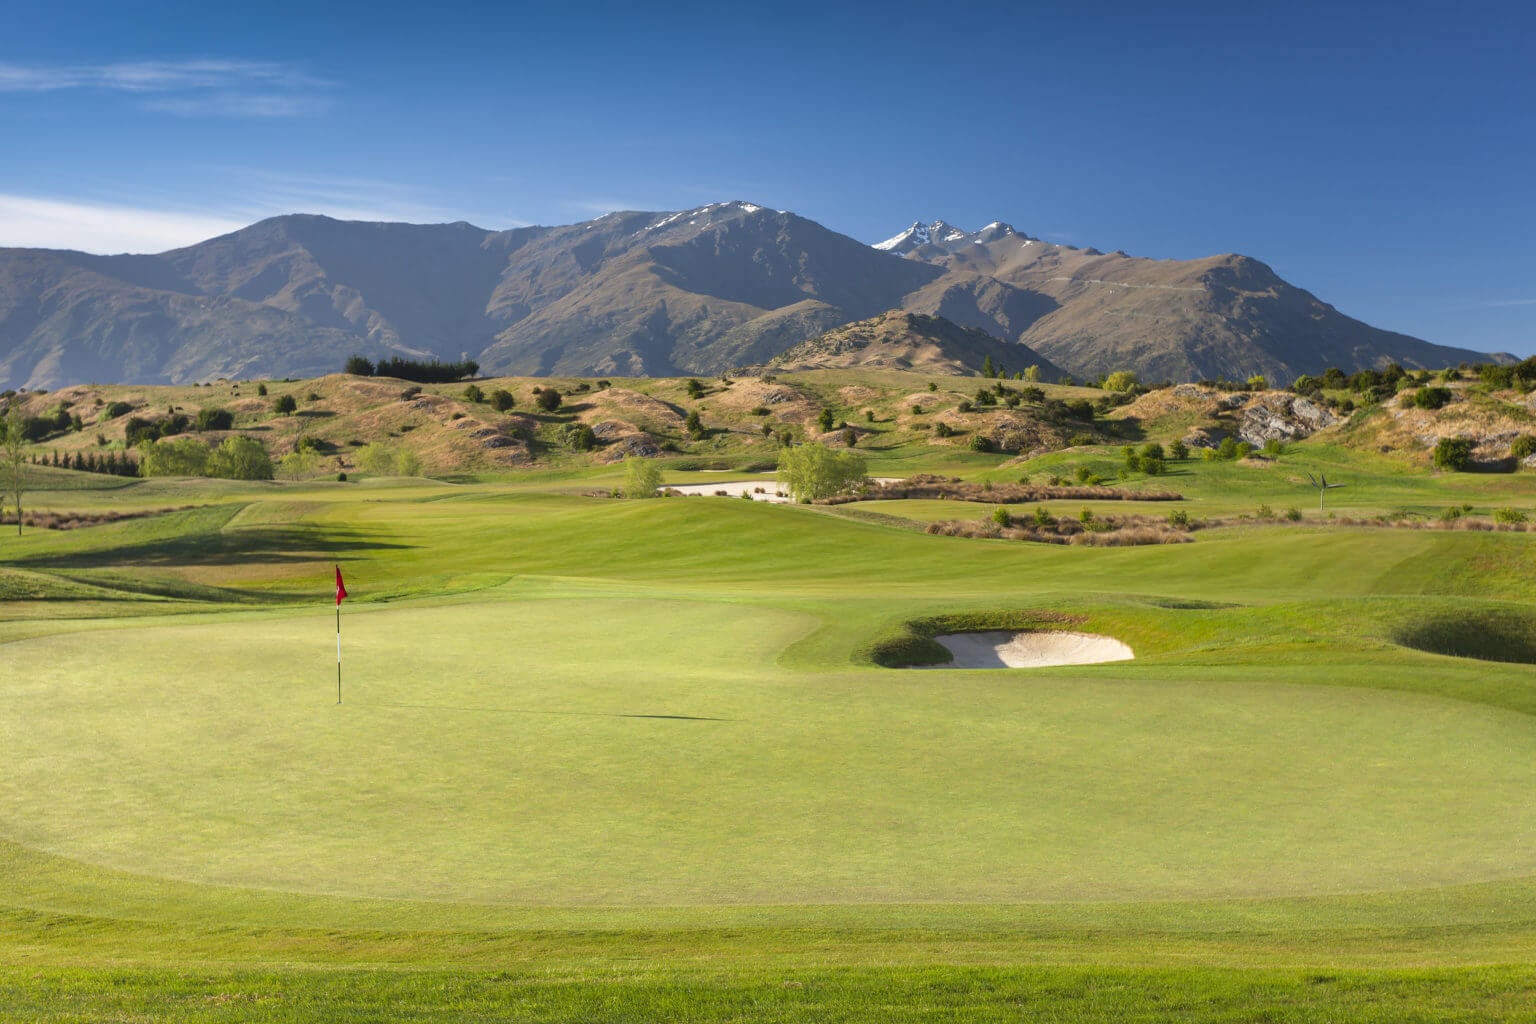 Mountains surround the golf course on all sides